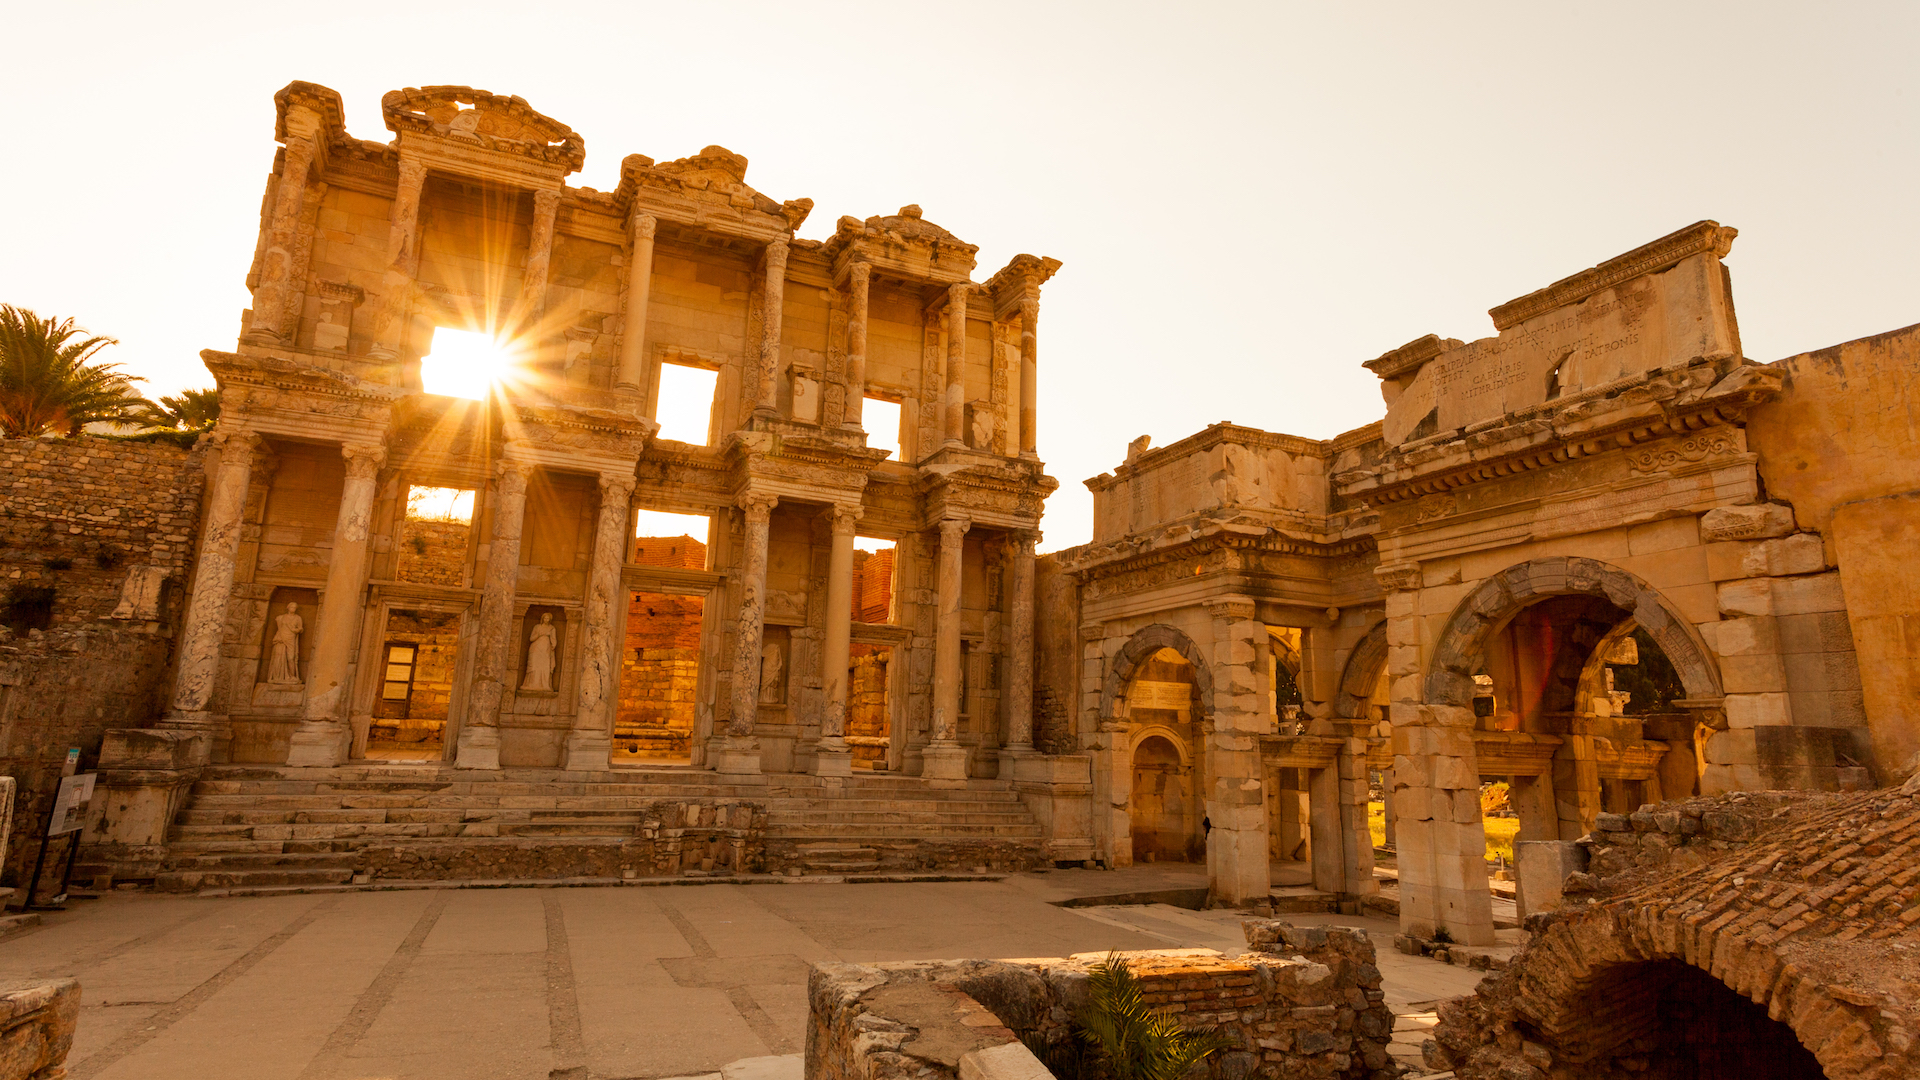 Free download Library of Celsus in Ephesus Turkey YACHTZOO yachts for [1920x1080] for your Desktop, Mobile & Tablet. Explore Ephesus Wallpaper